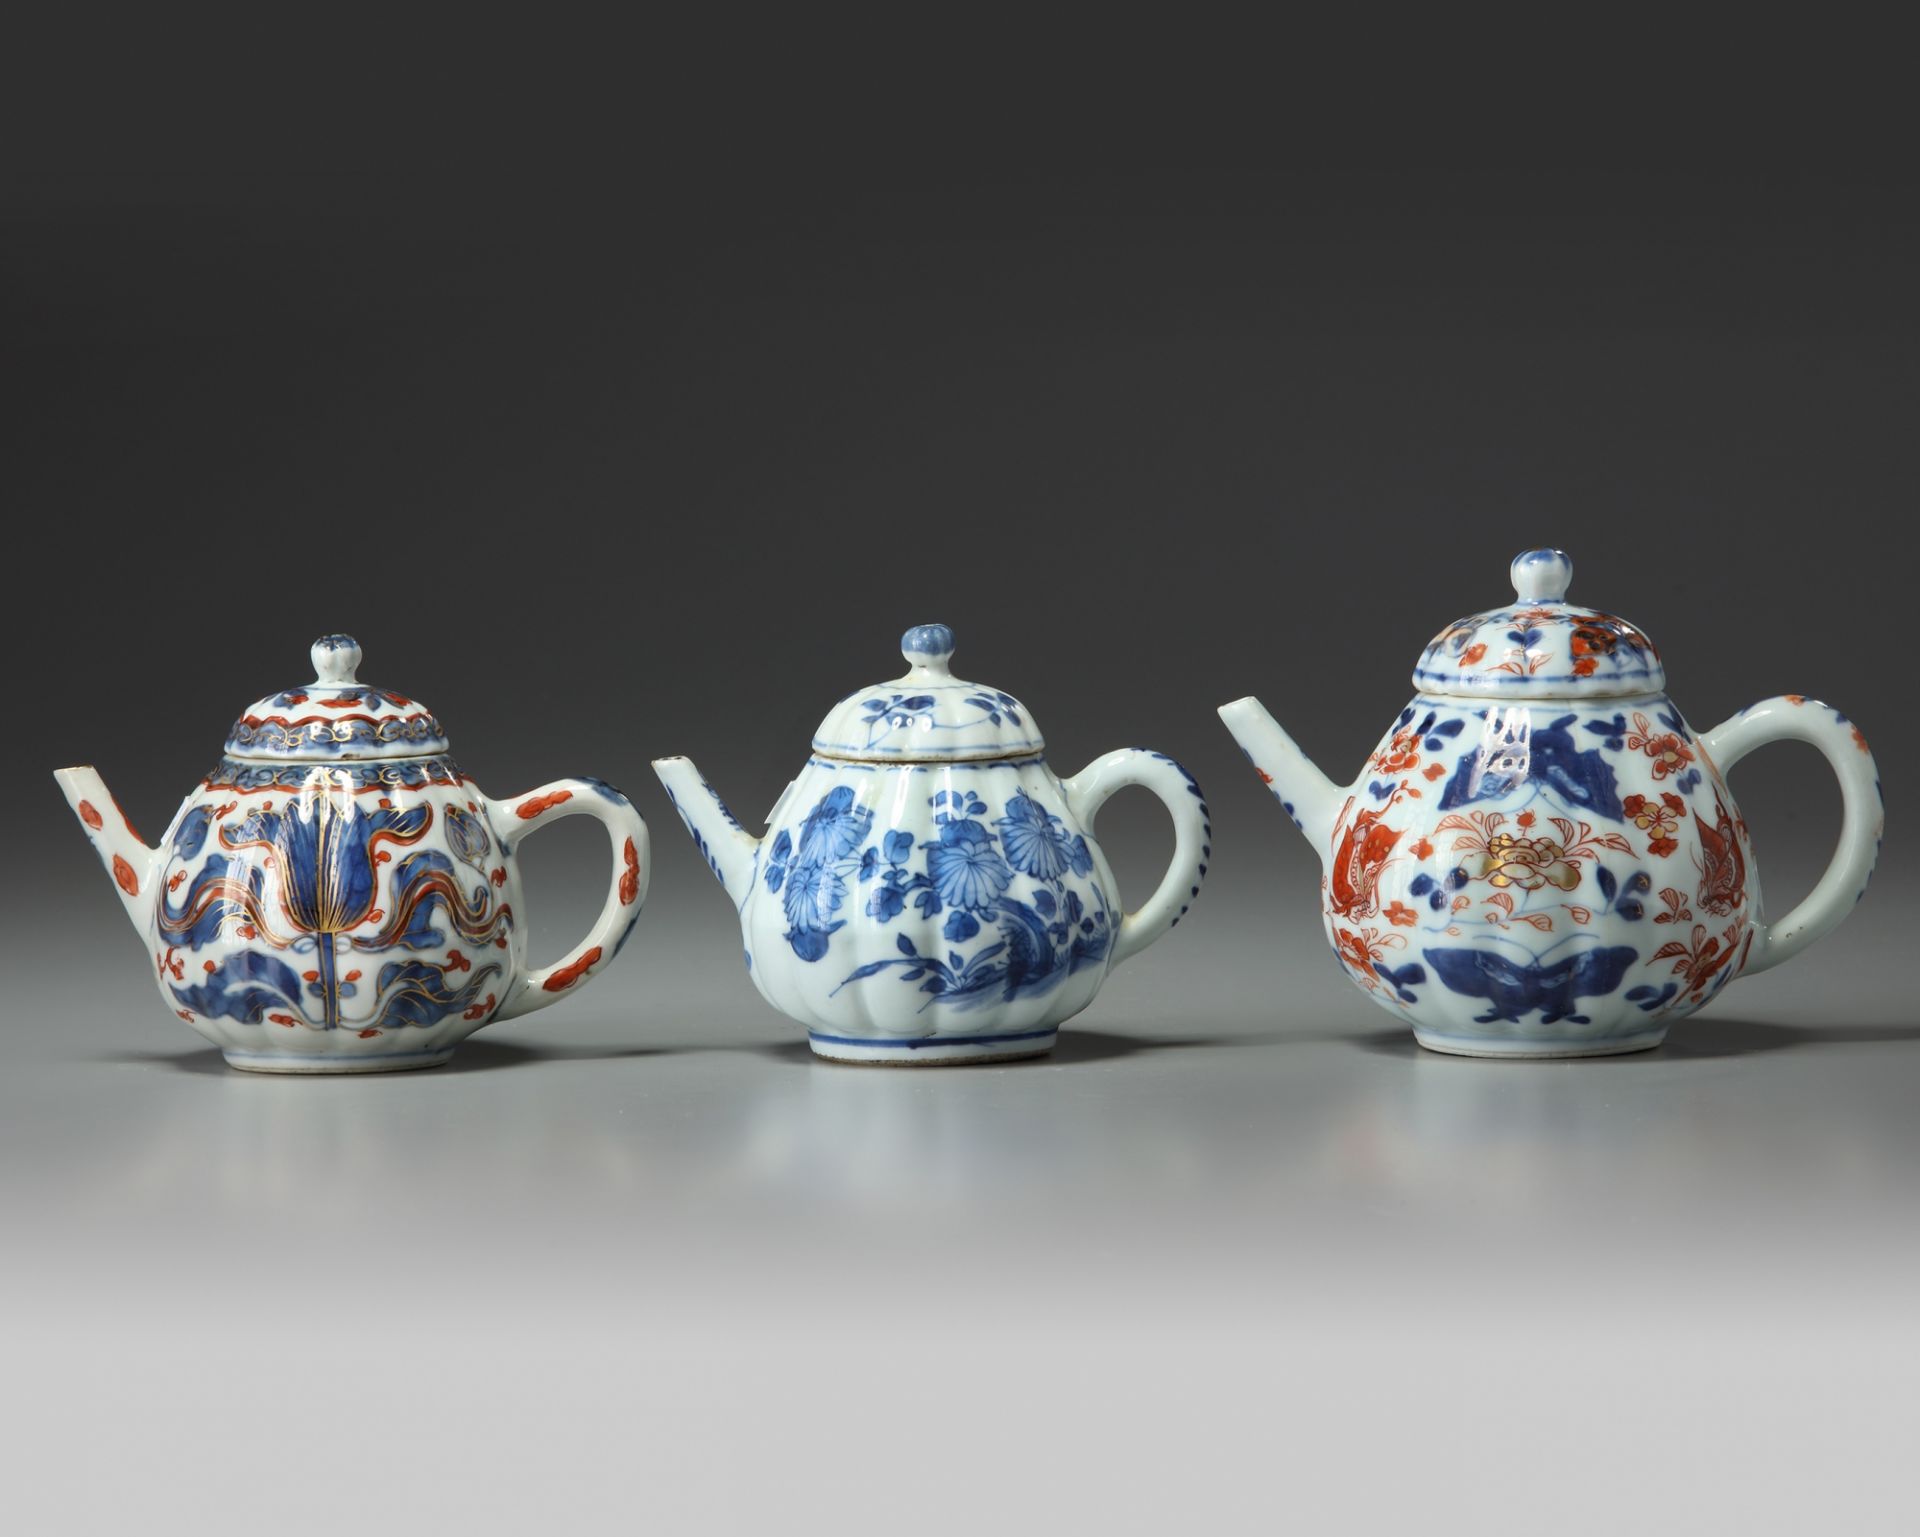 Three Chinese moulded teapots and covers